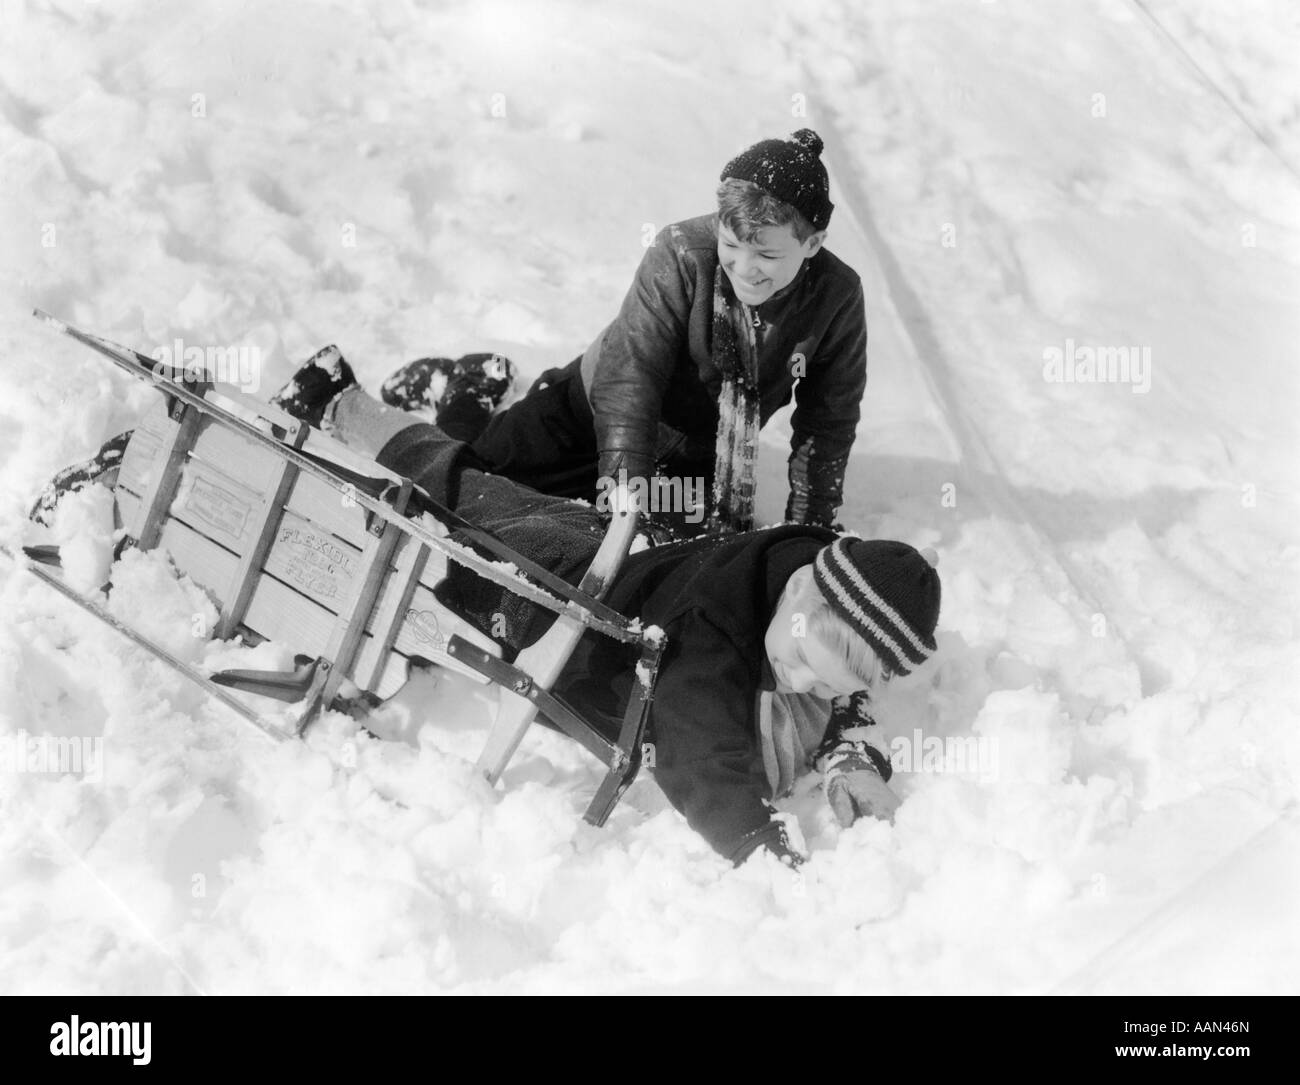 1930s 1940s TWO BOYS LAUGHING IN SNOW FALLING OFF OF SLED THAT IS TURNED ON ITS SIDE Stock Photo